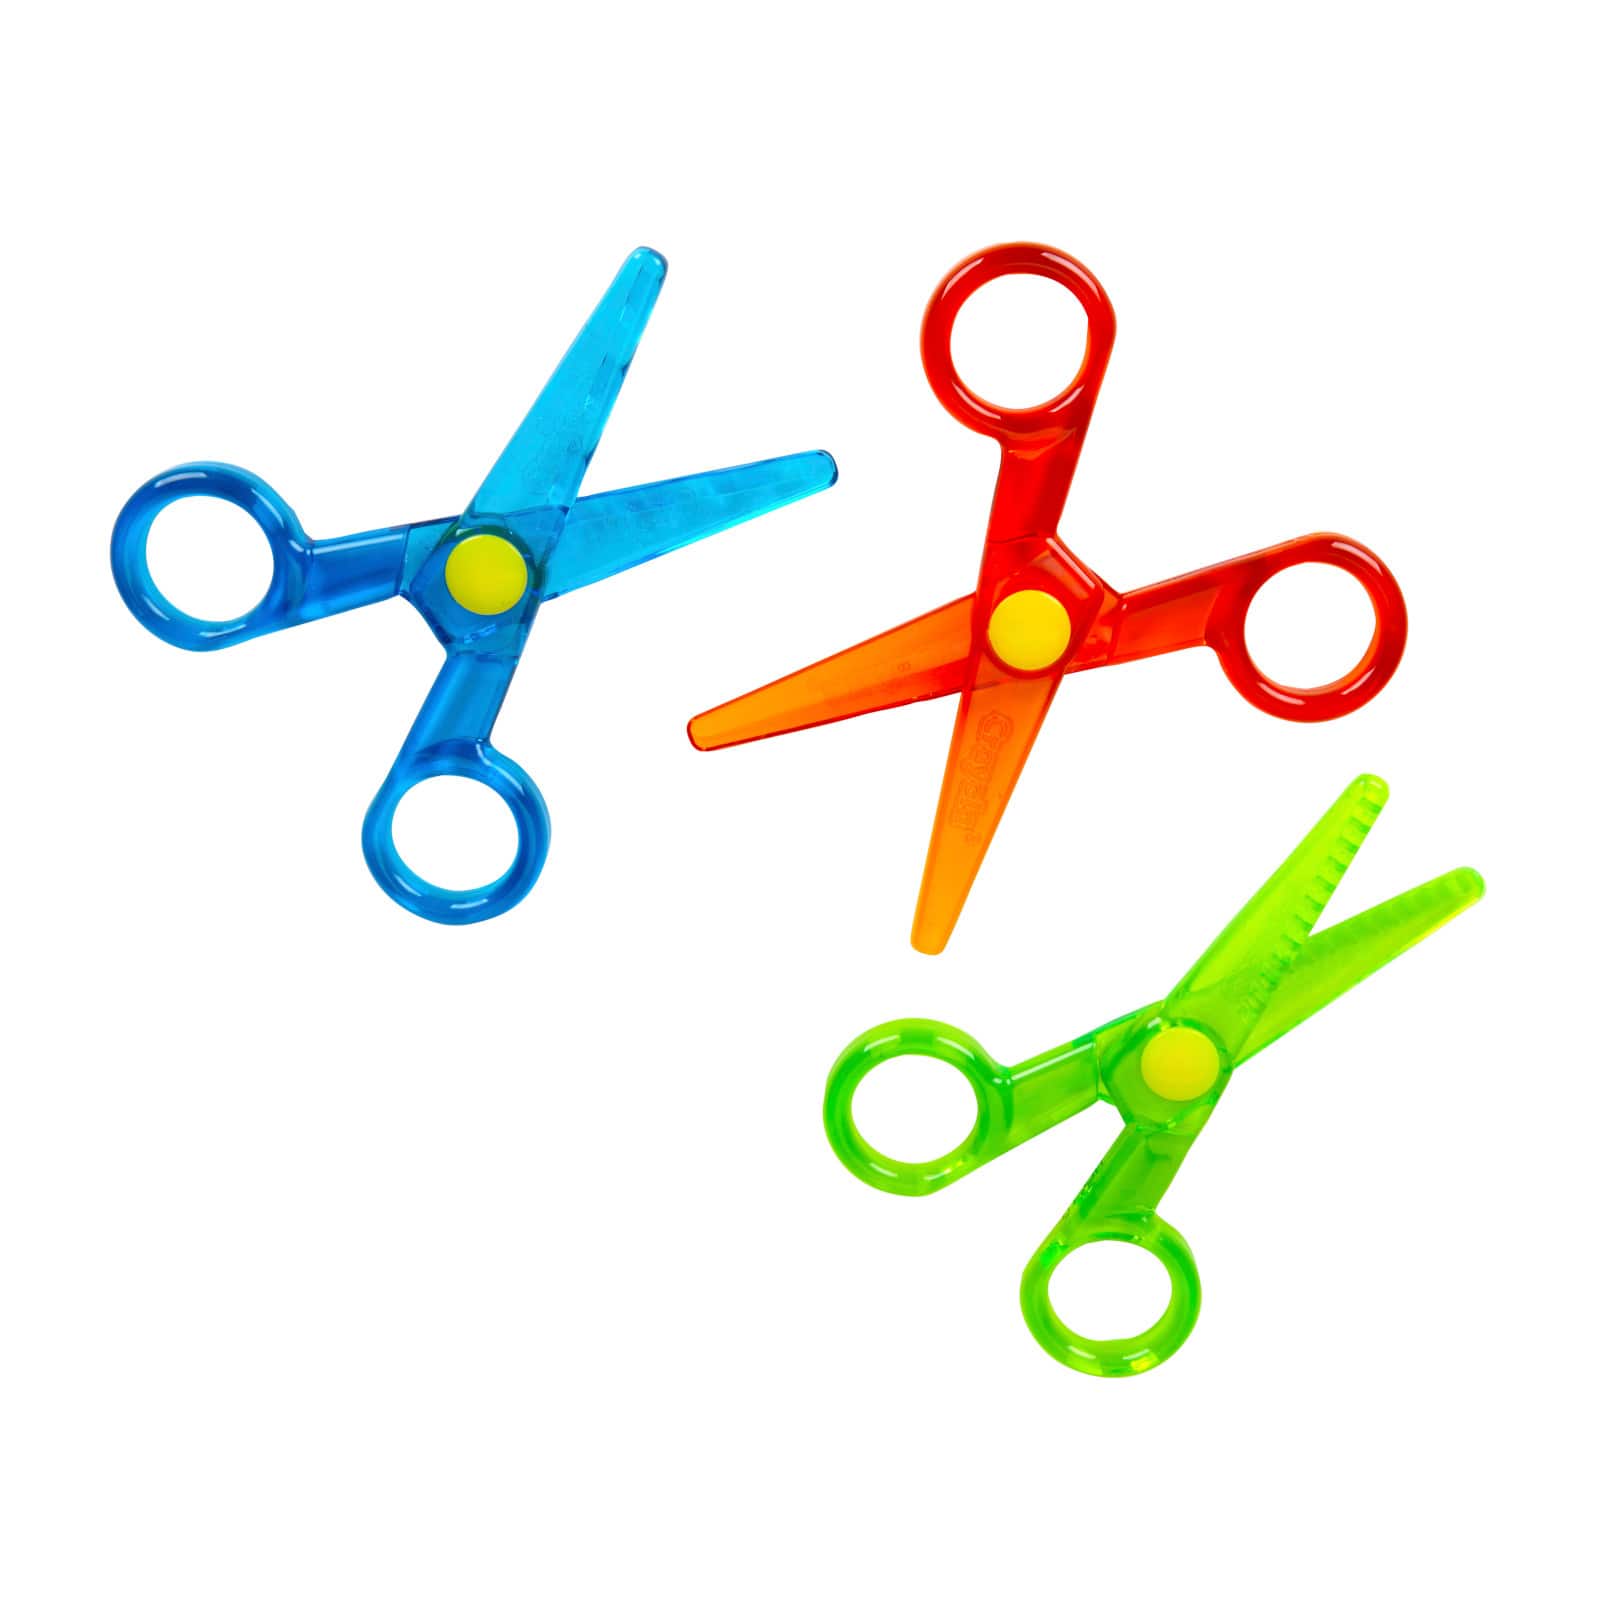 Kids Safety Scissors - KPKSS-1 - IdeaStage Promotional Products